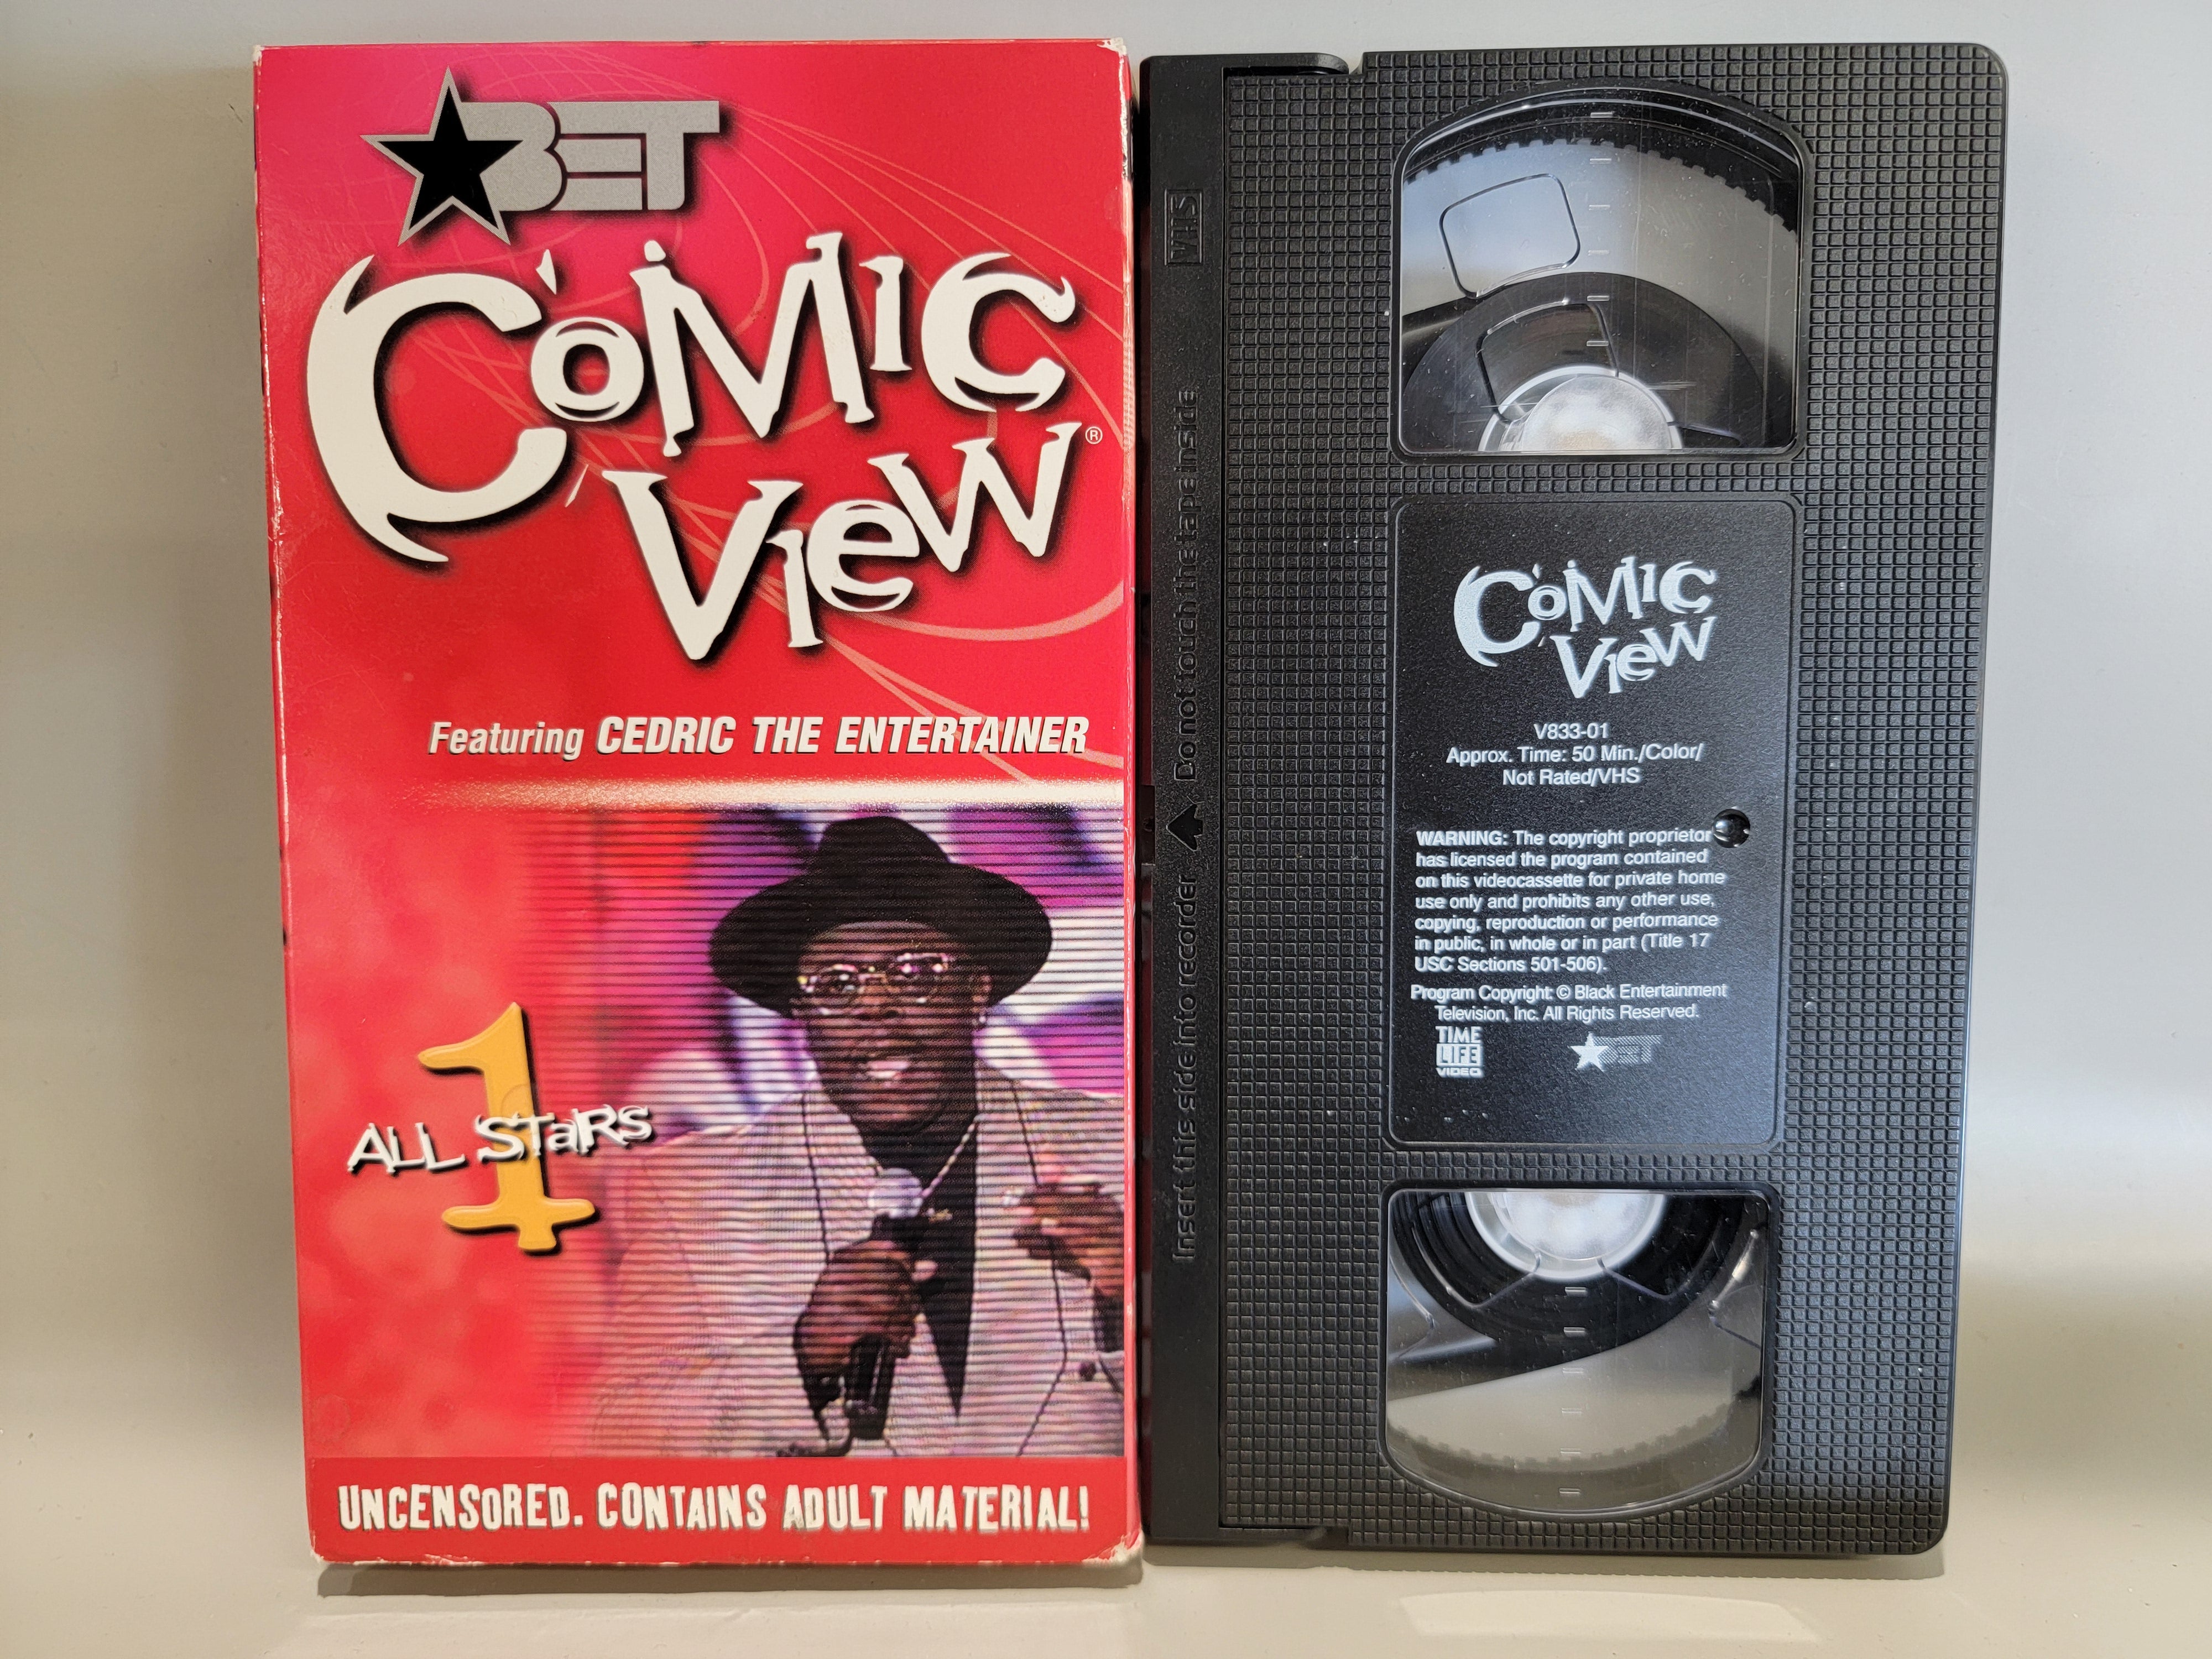 COMIC VIEW ALL STARS 1 VHS [USED]